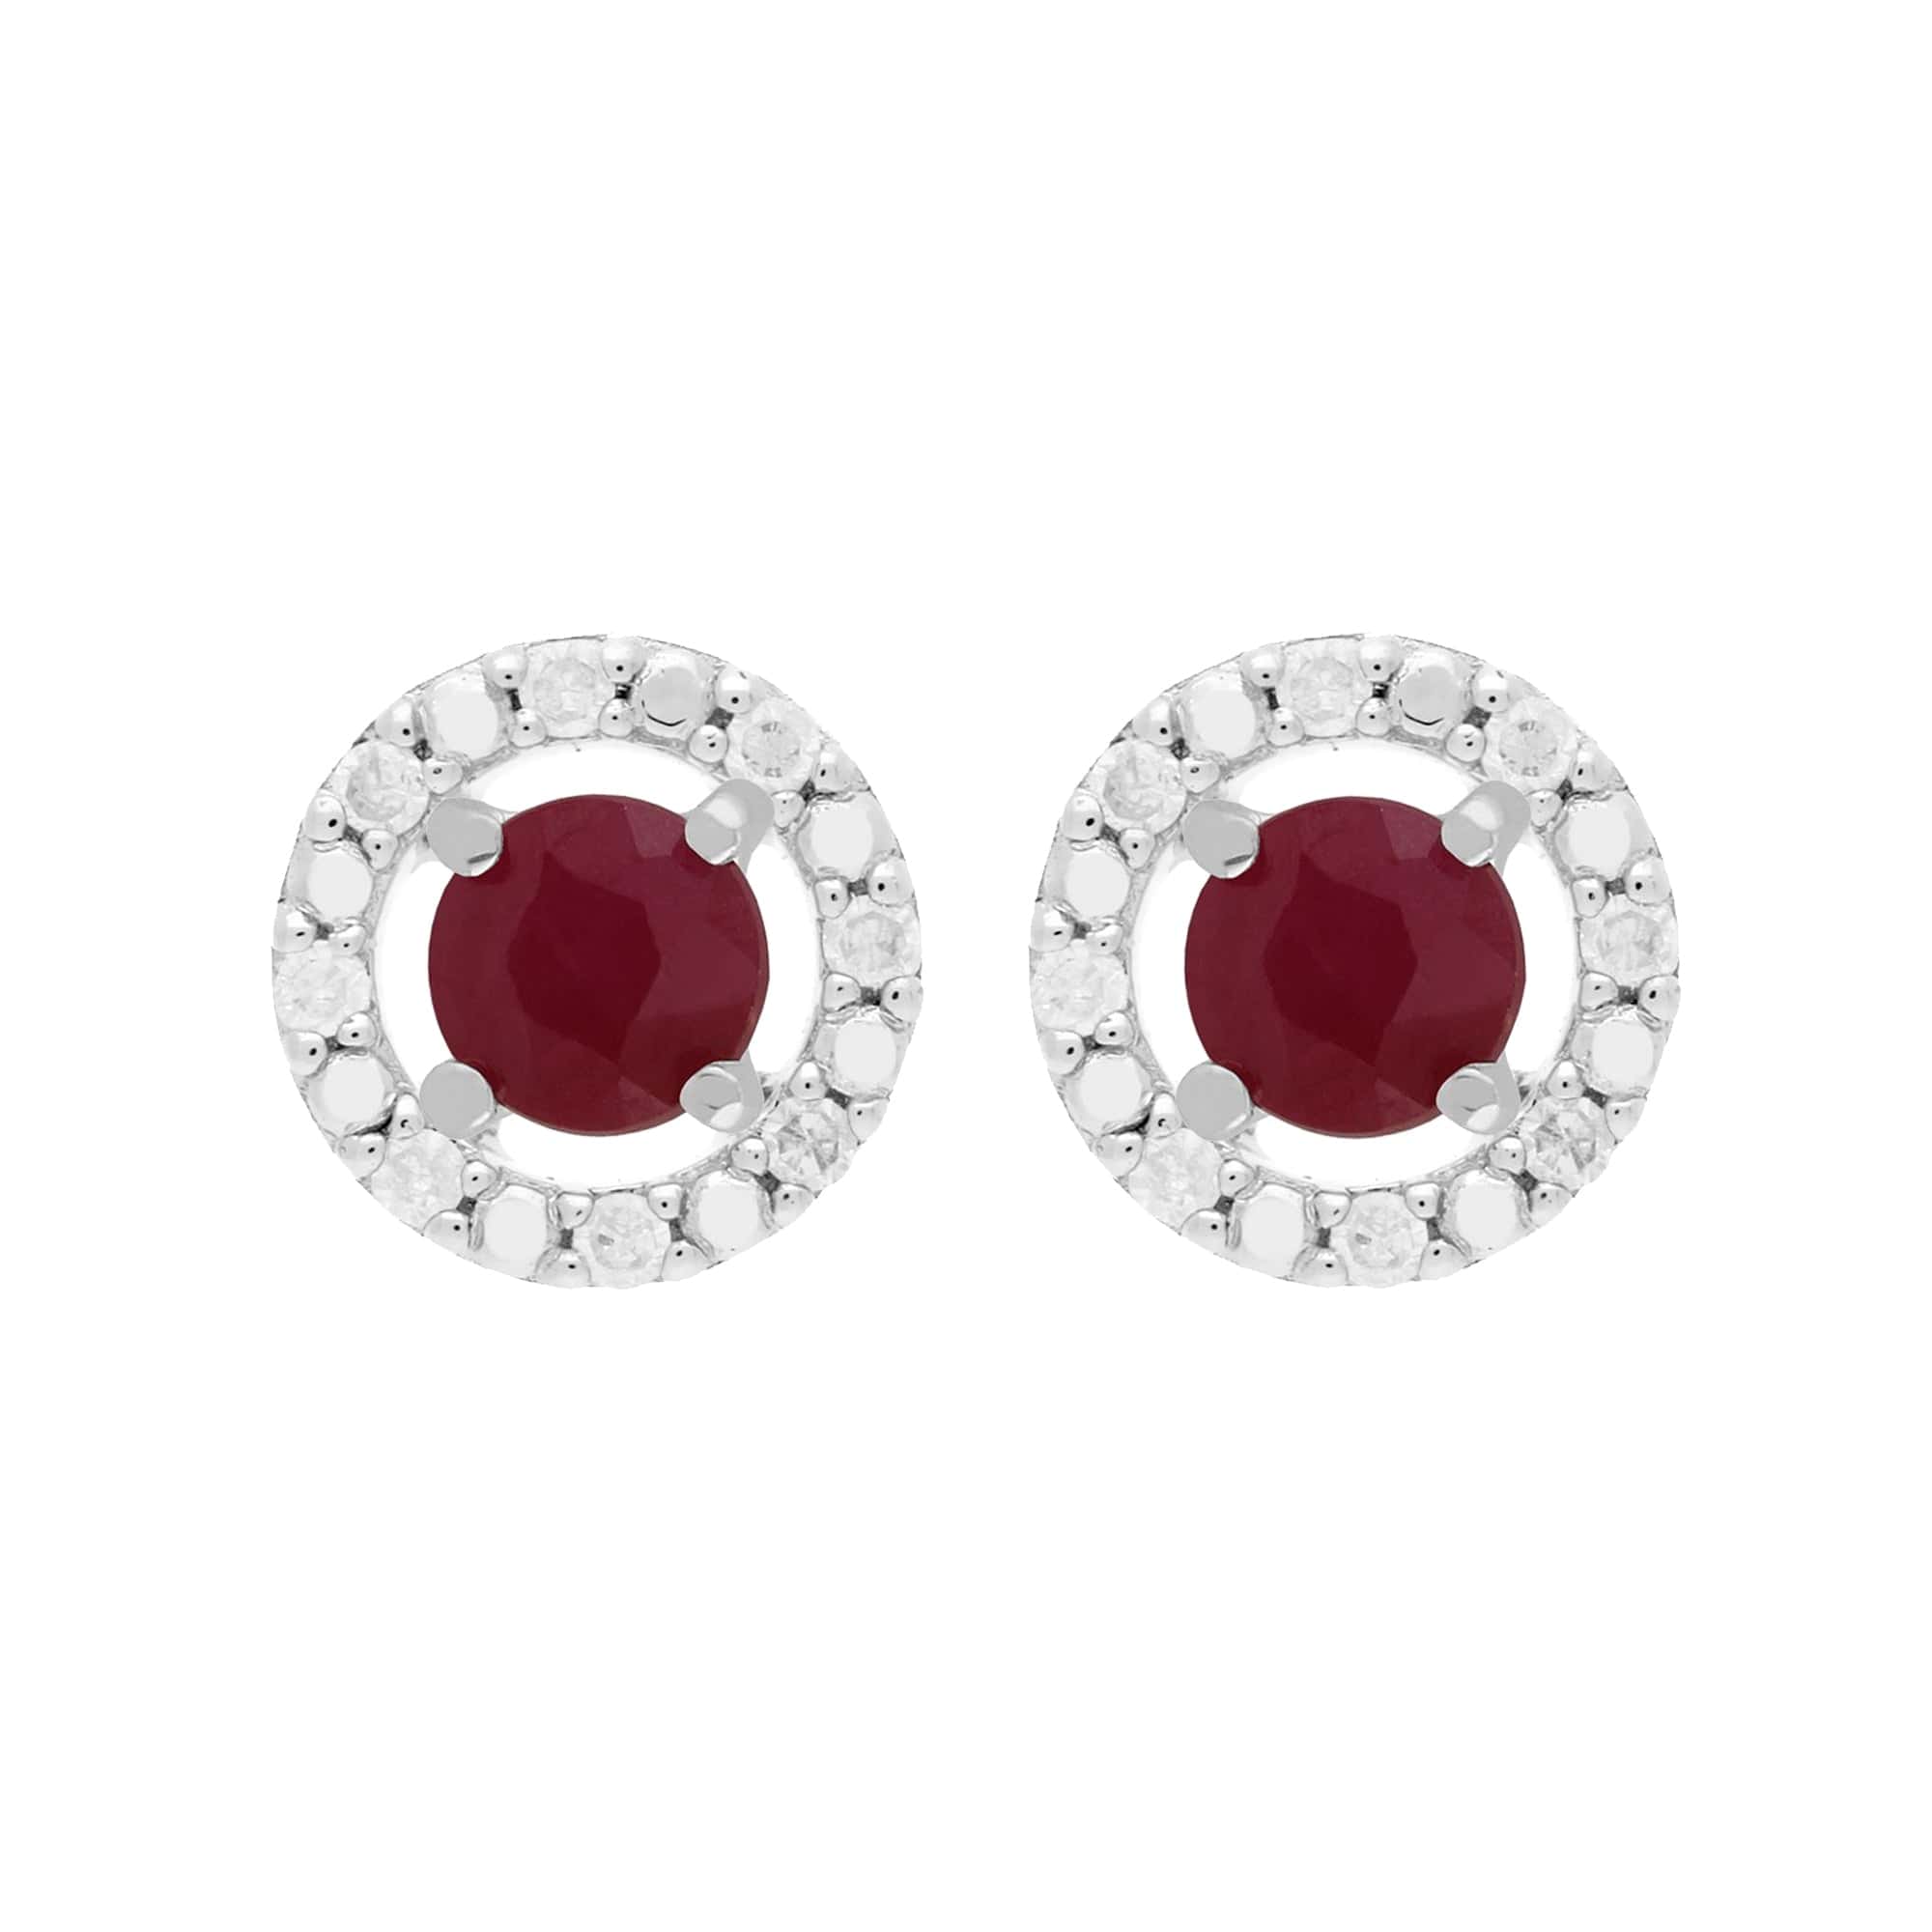 11622-162E0228019 Classic Round Ruby Stud Earrings with Detachable Diamond Round Ear Jacket in 9ct White Gold 1